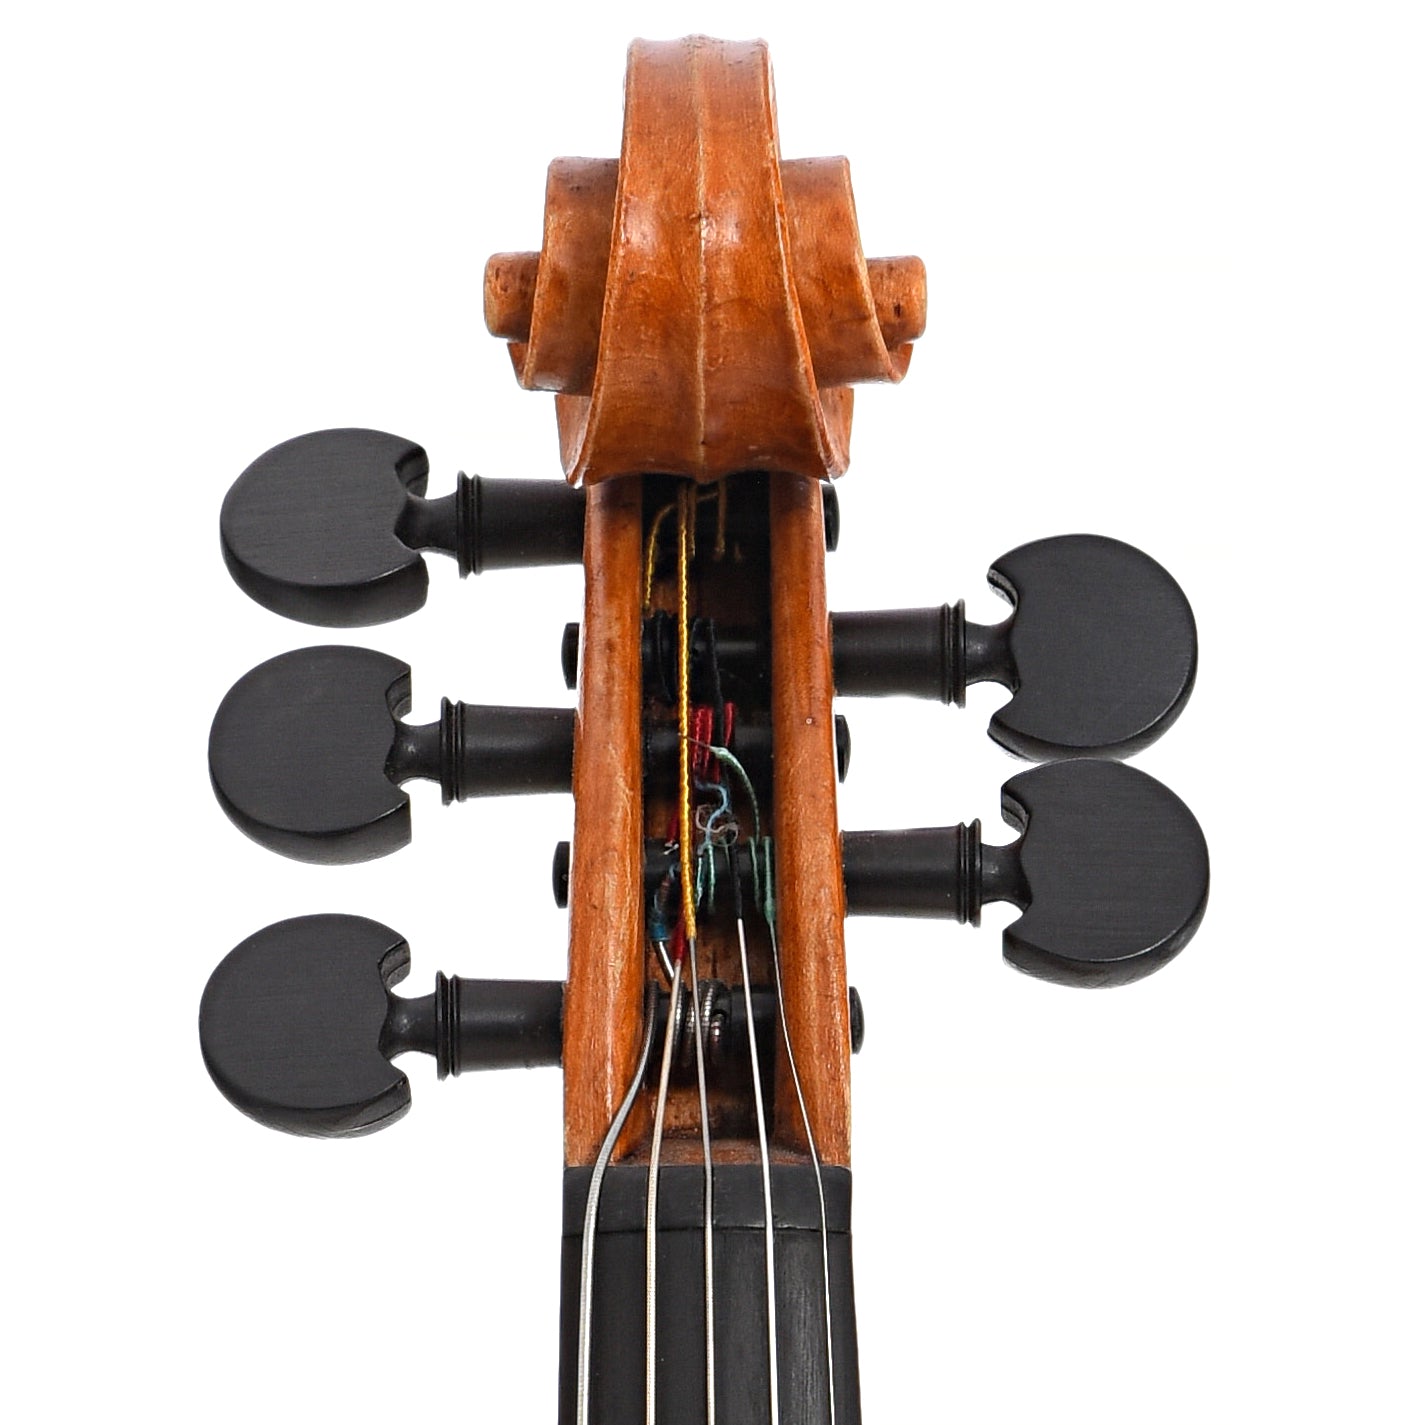 Scroll of Barry Dudley 5-String Violin (2010)